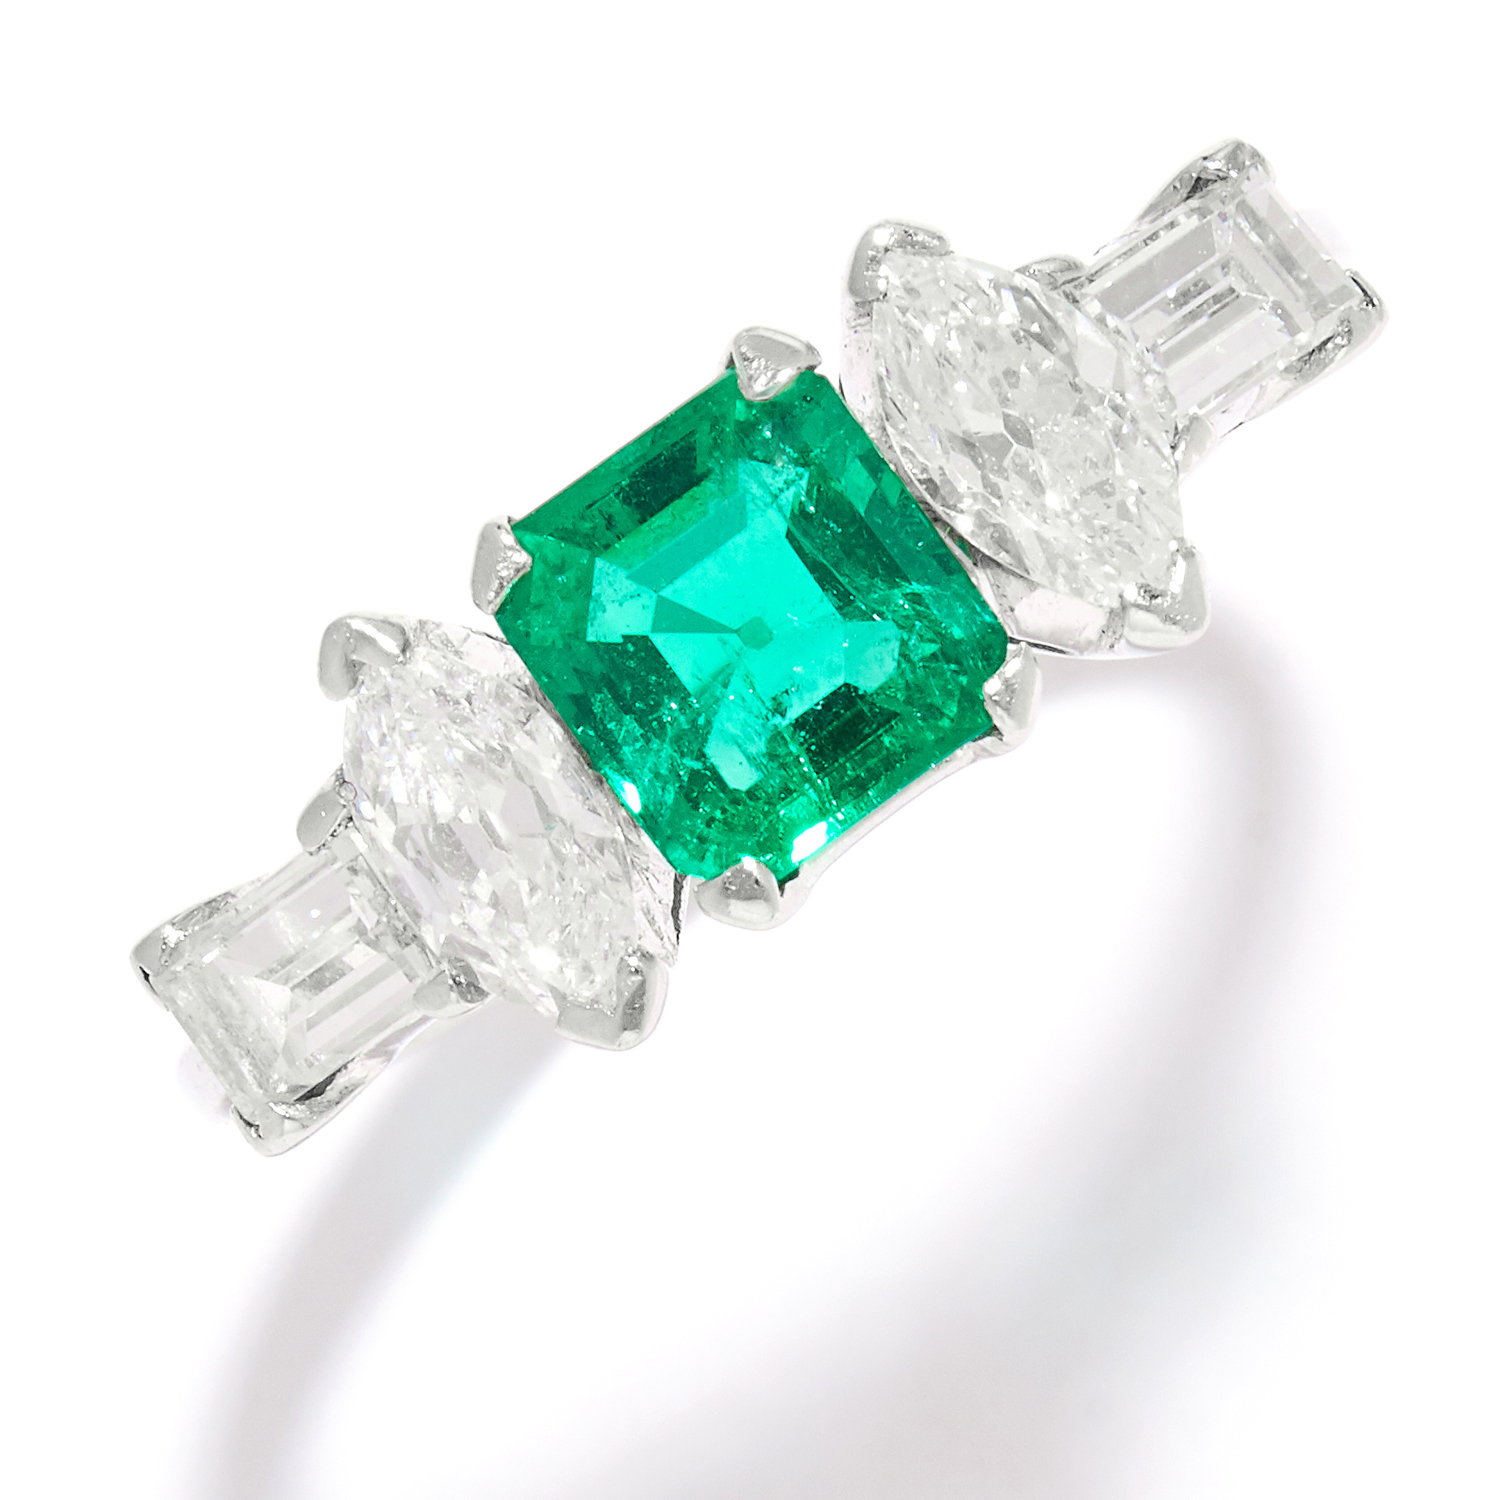 COLOMBIAN EMERALD AND DIAMOND RING in platinum, the step cut emerald of 1.0 carats between